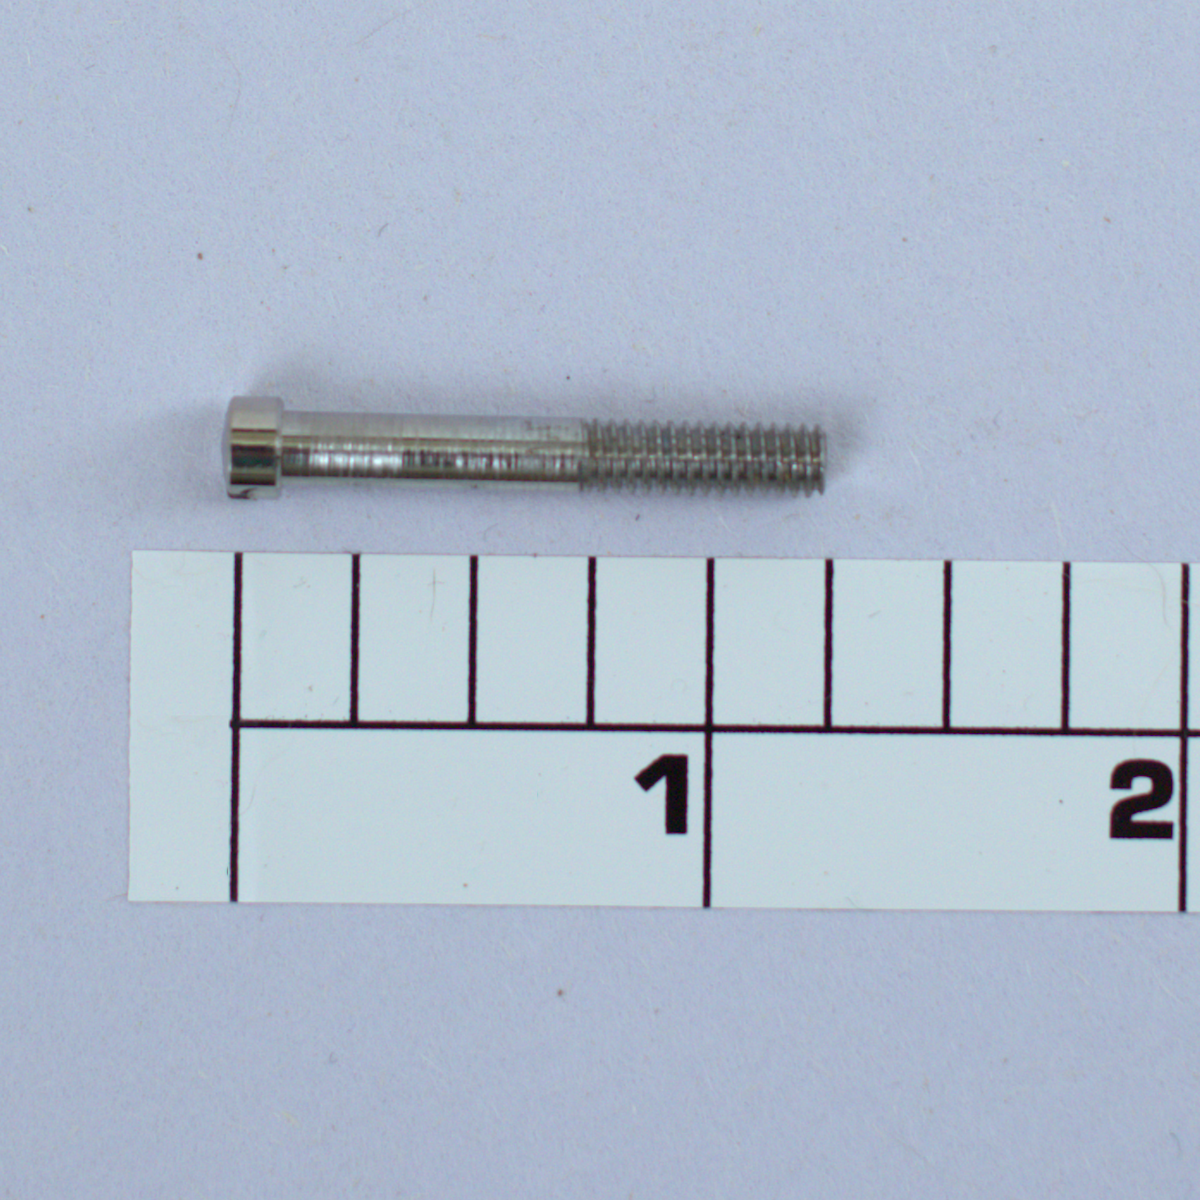 39-50 Screw, Long, Slotted Head